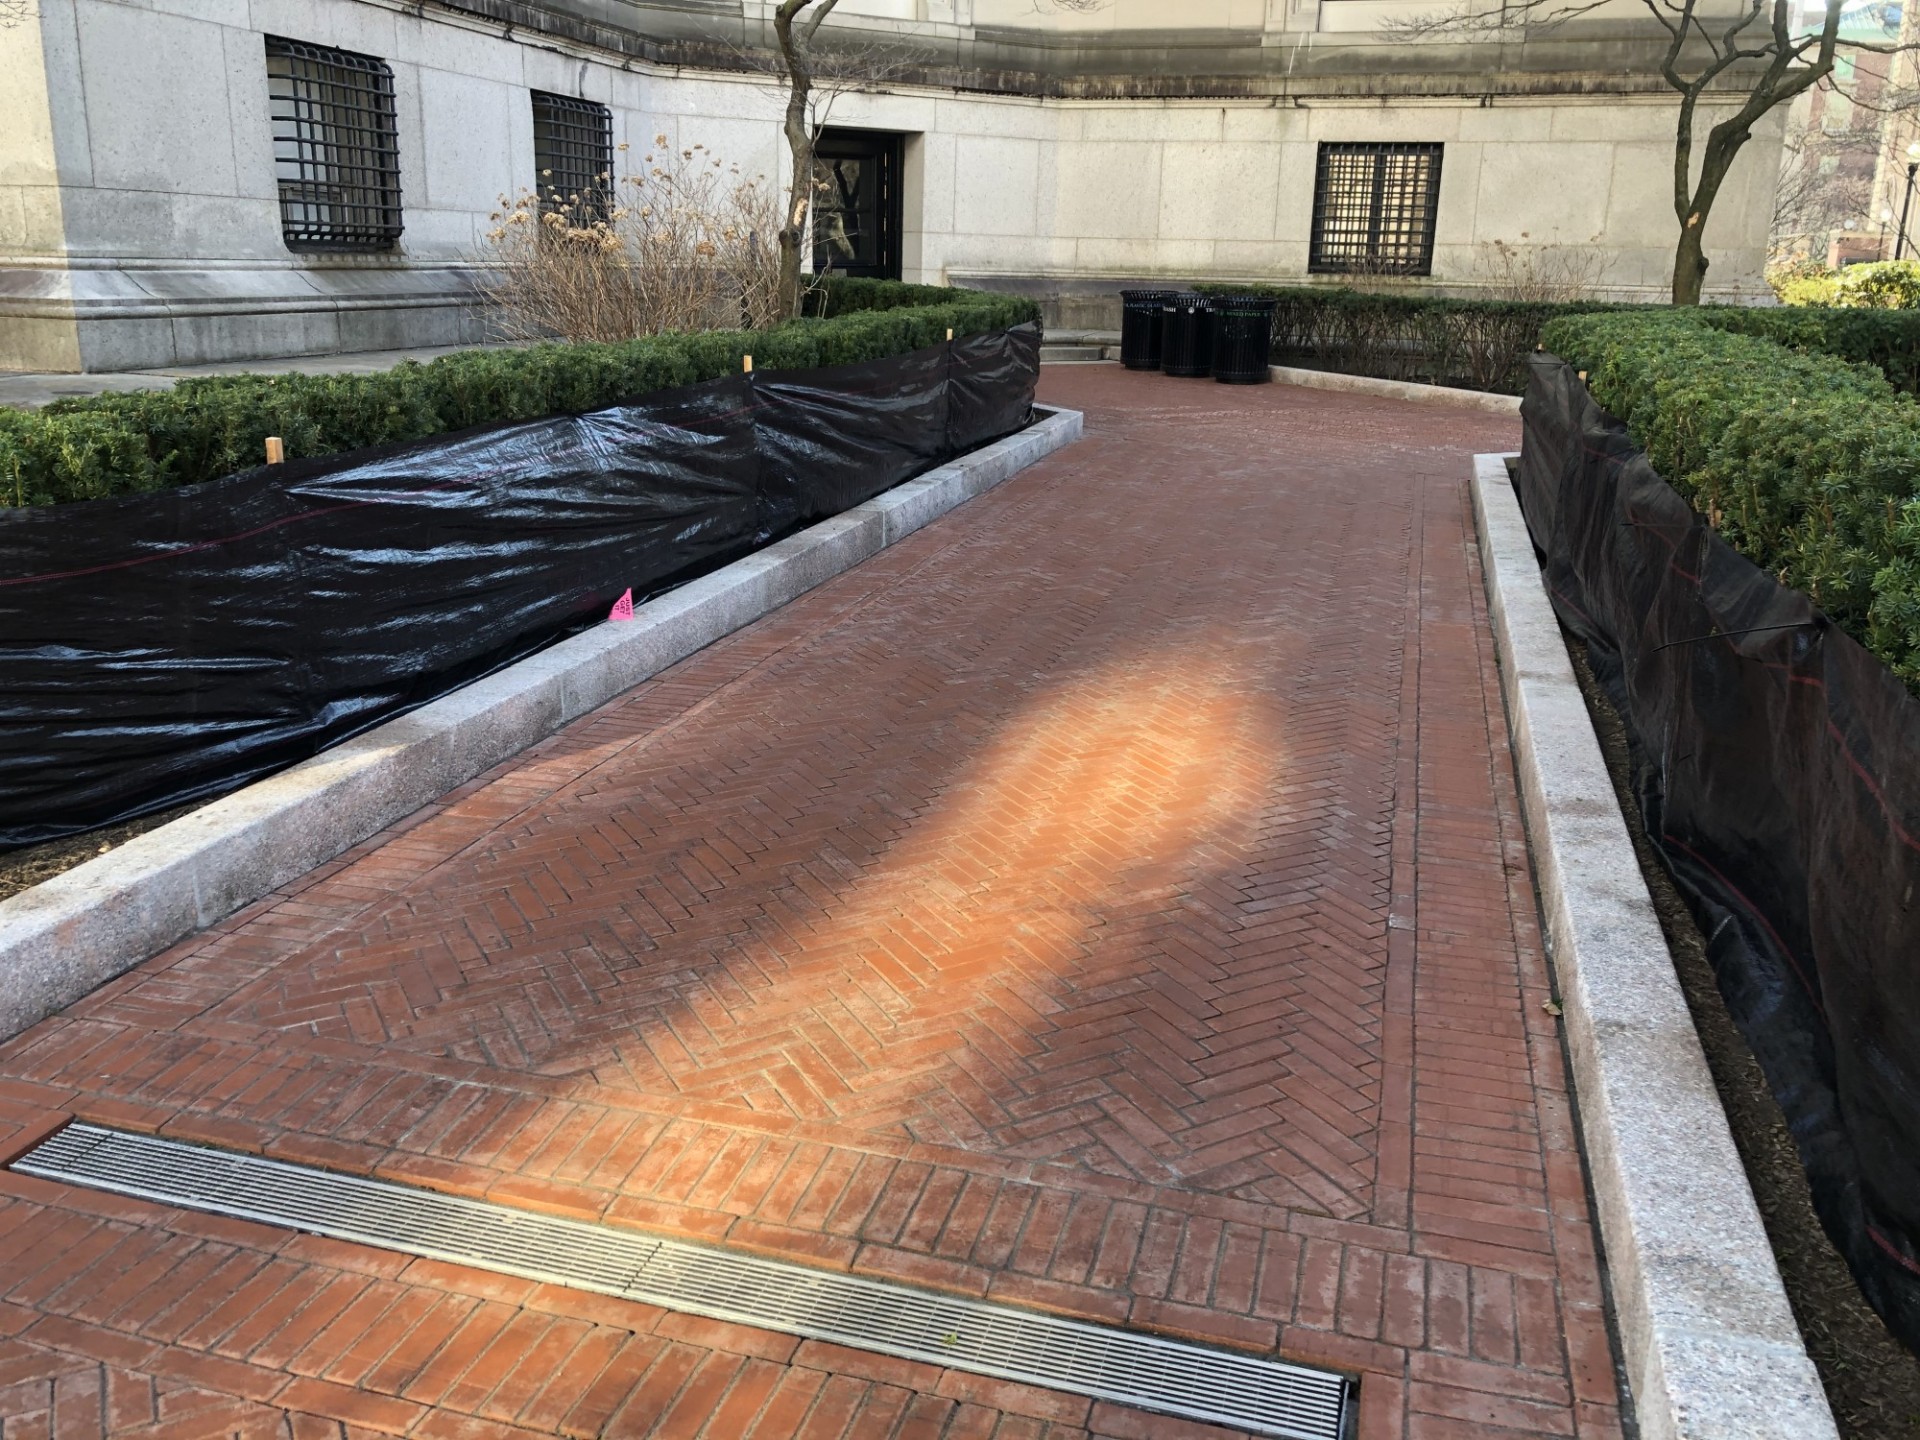 Brick pavers were repaired and a new trench drain was installed at the walkway leading to the northwest entrance of Low Library.